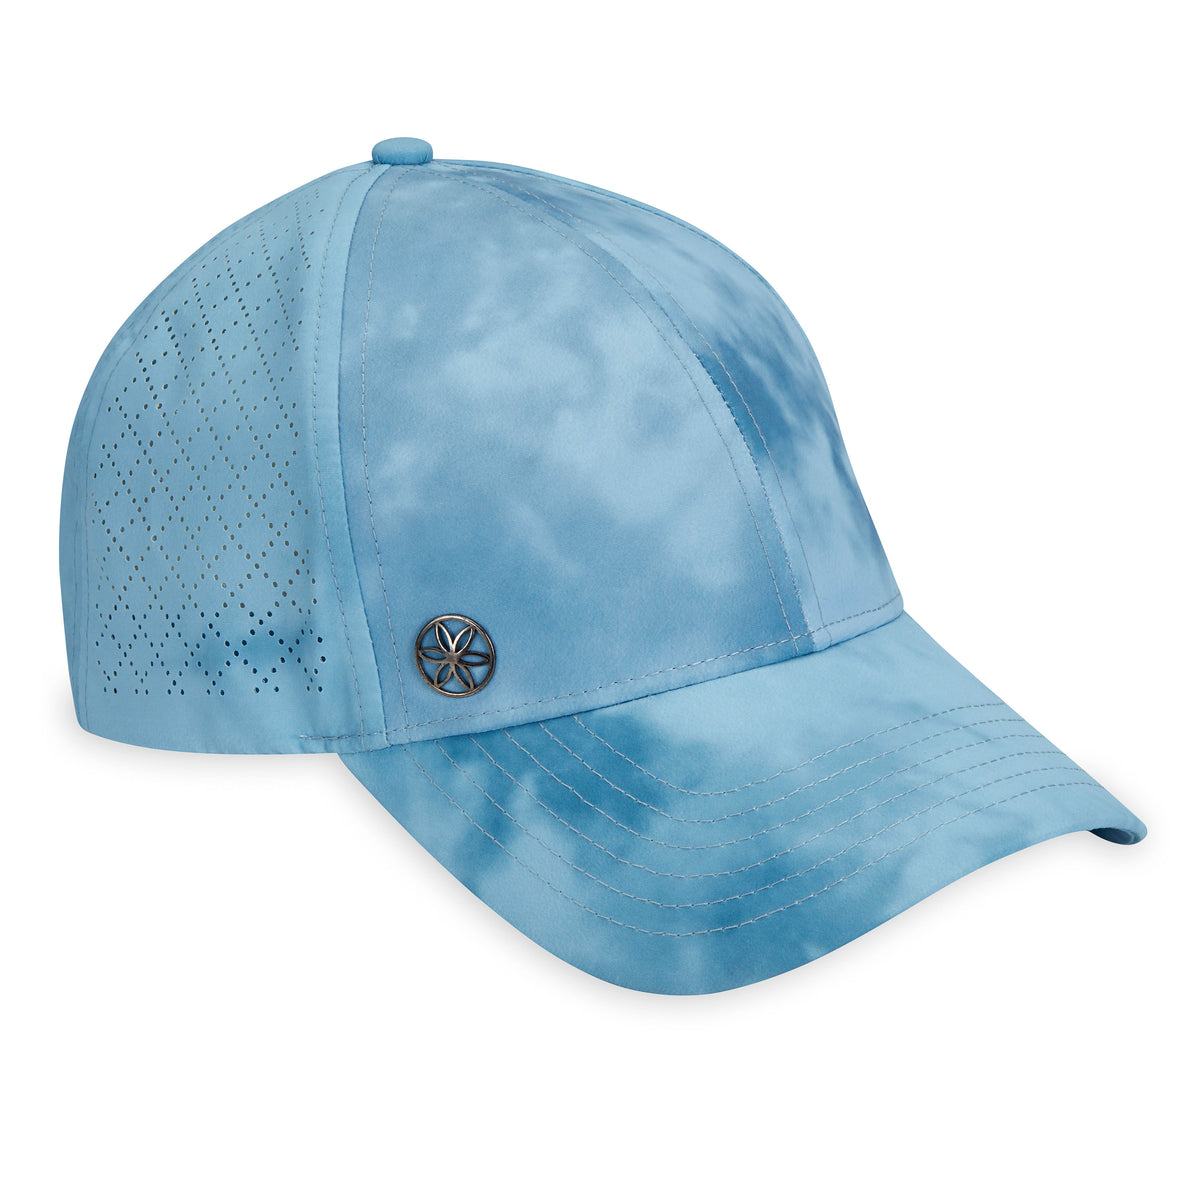 Wander Breathable Tie Dye Geo Hat front front